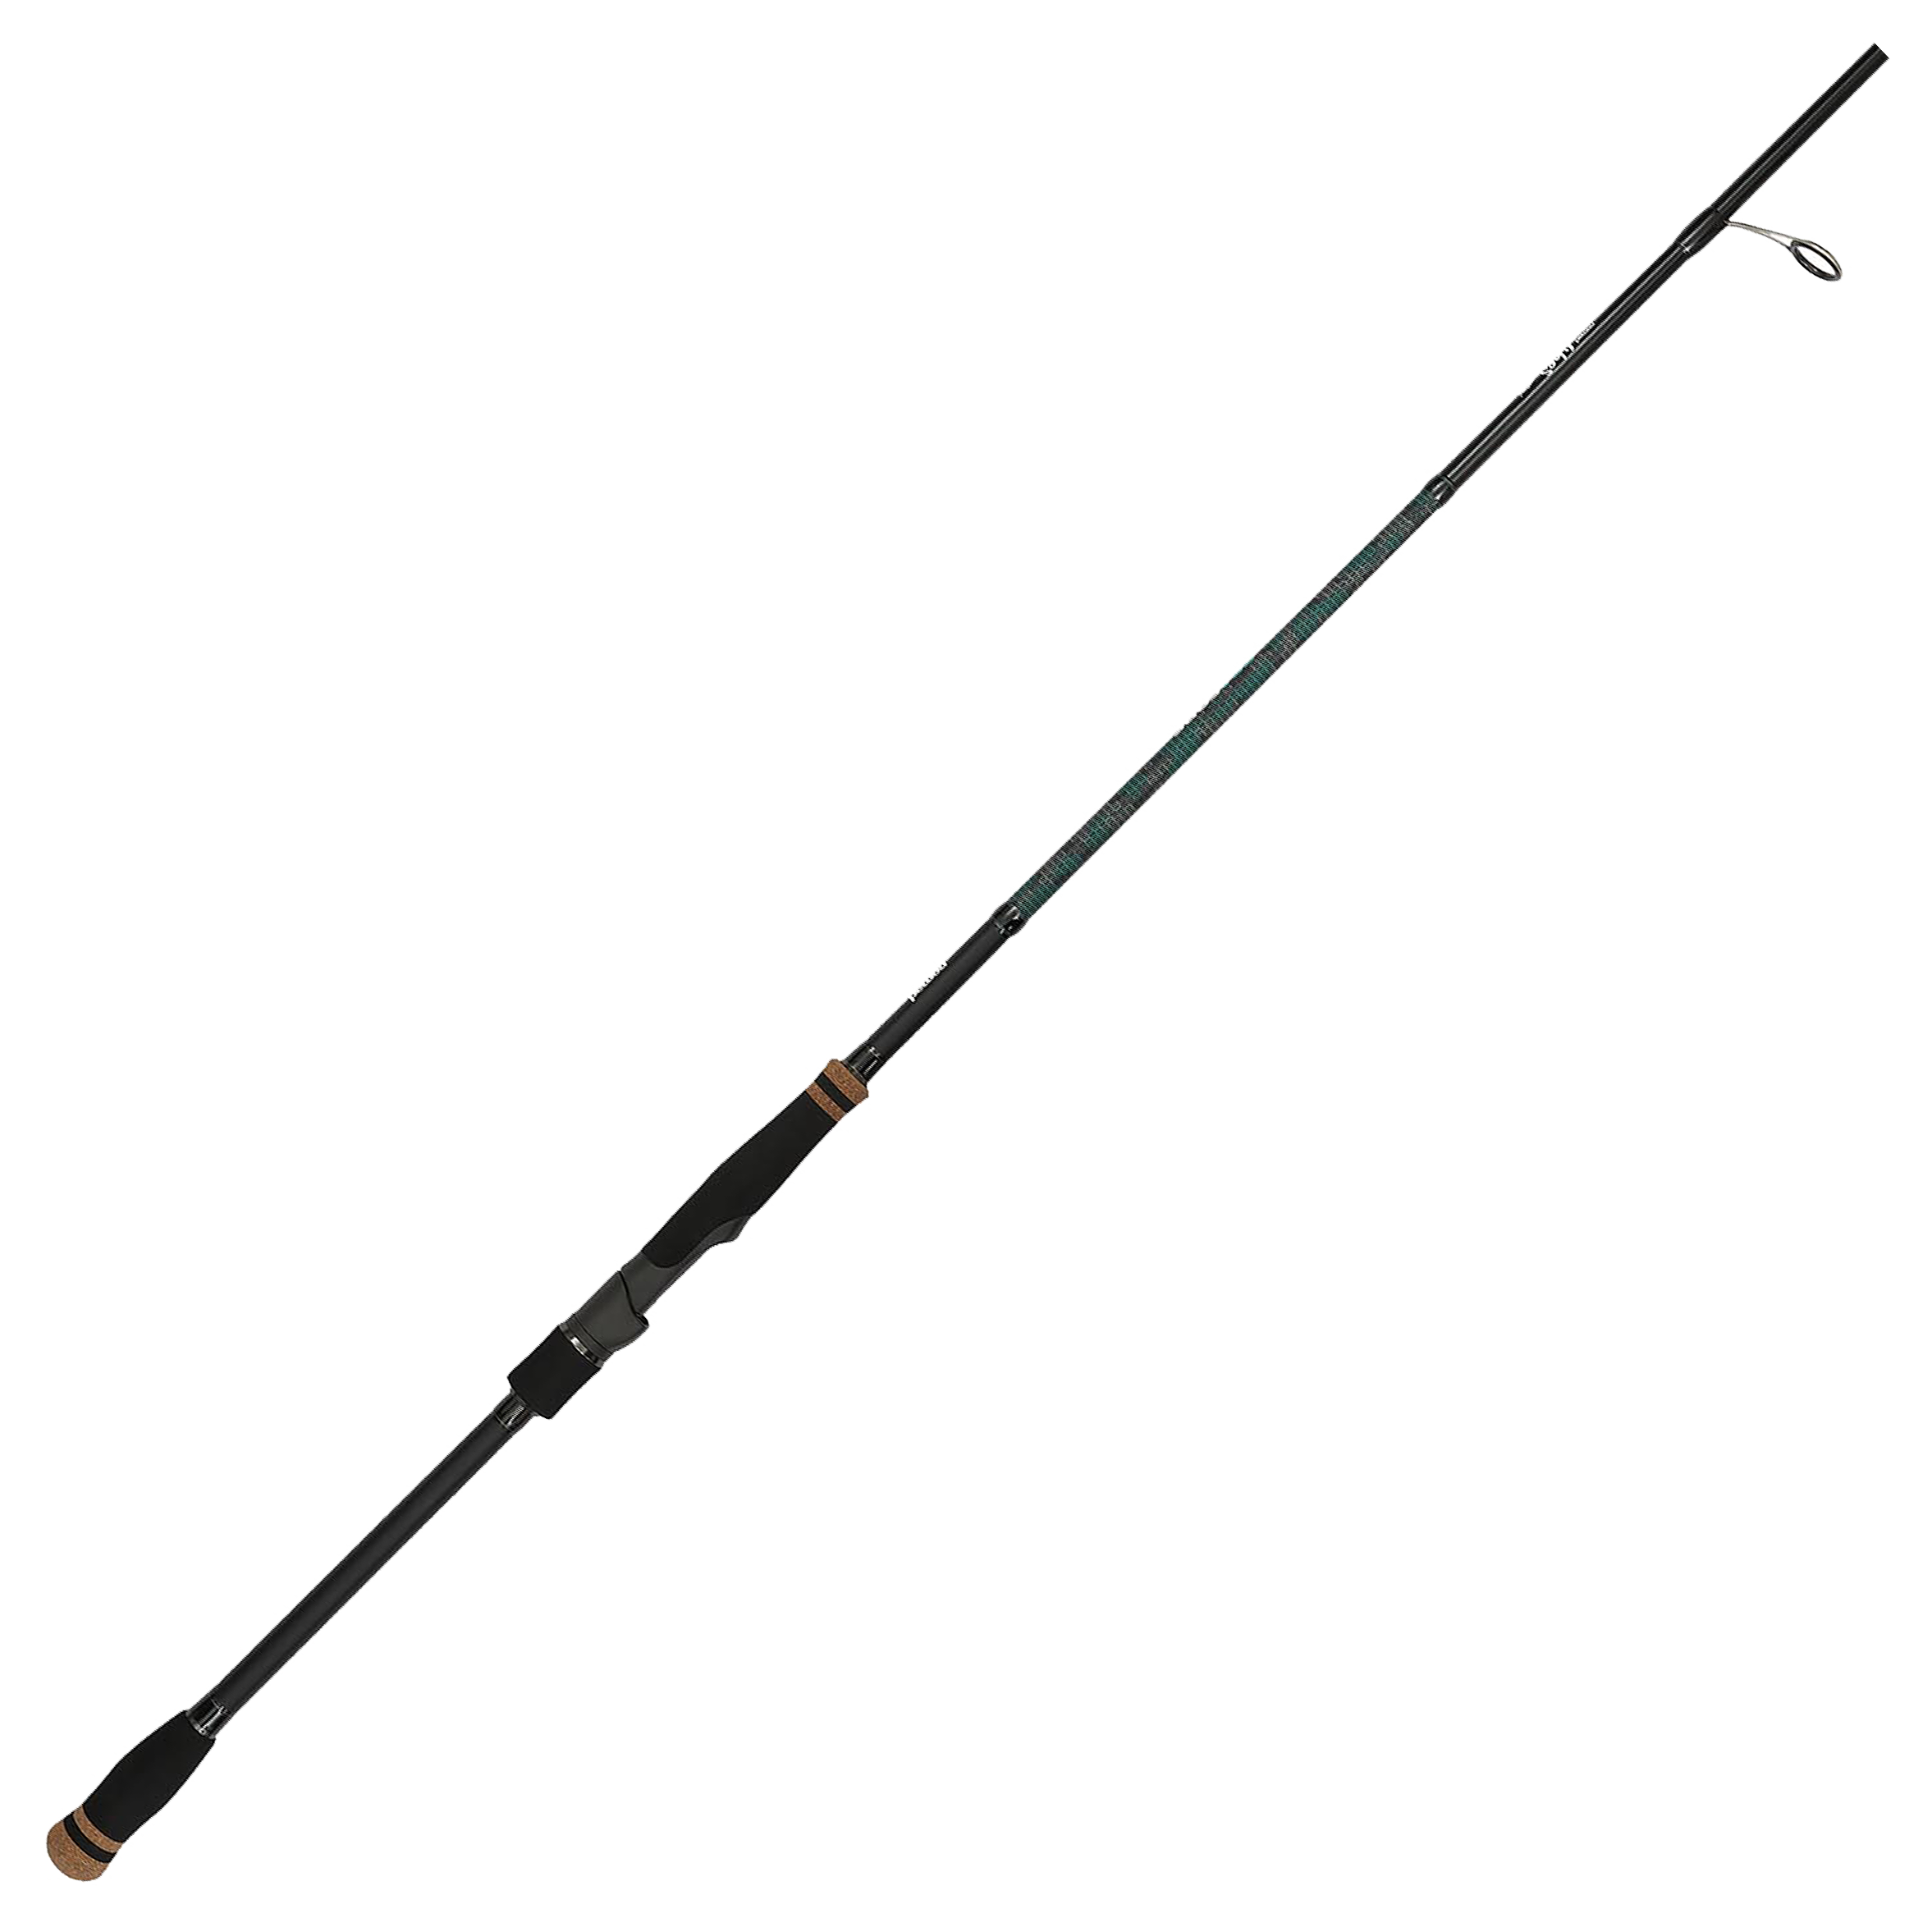 Nomad Design Seacore Vibing Spinning Rod